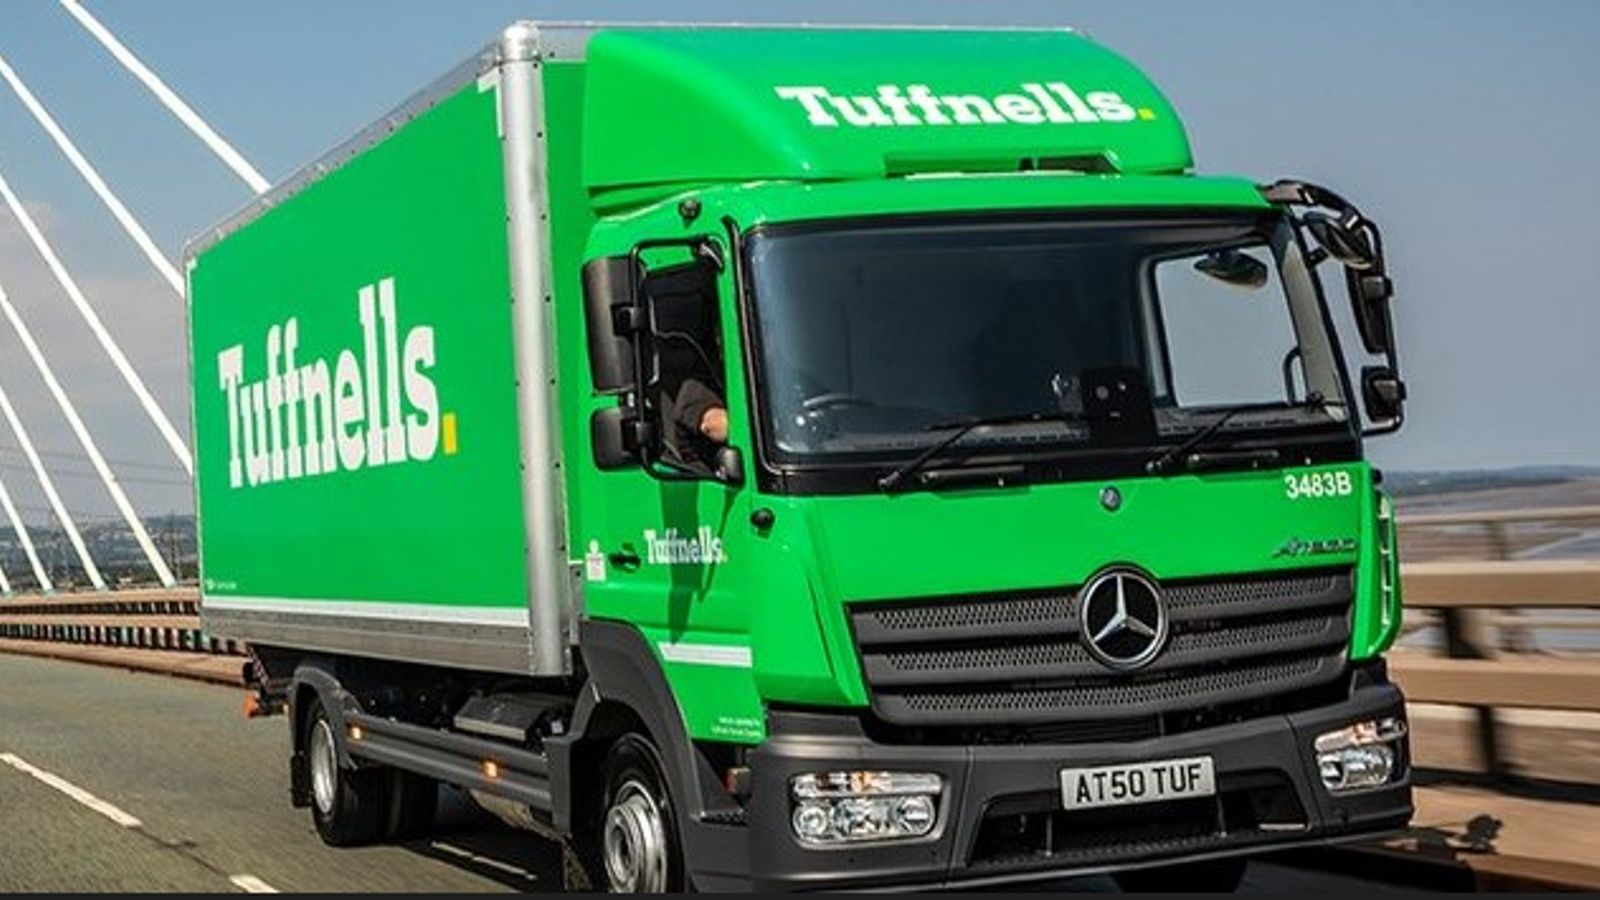 Logistics group Shift swoops on Tuffnells brand after 2,000 jobs axed